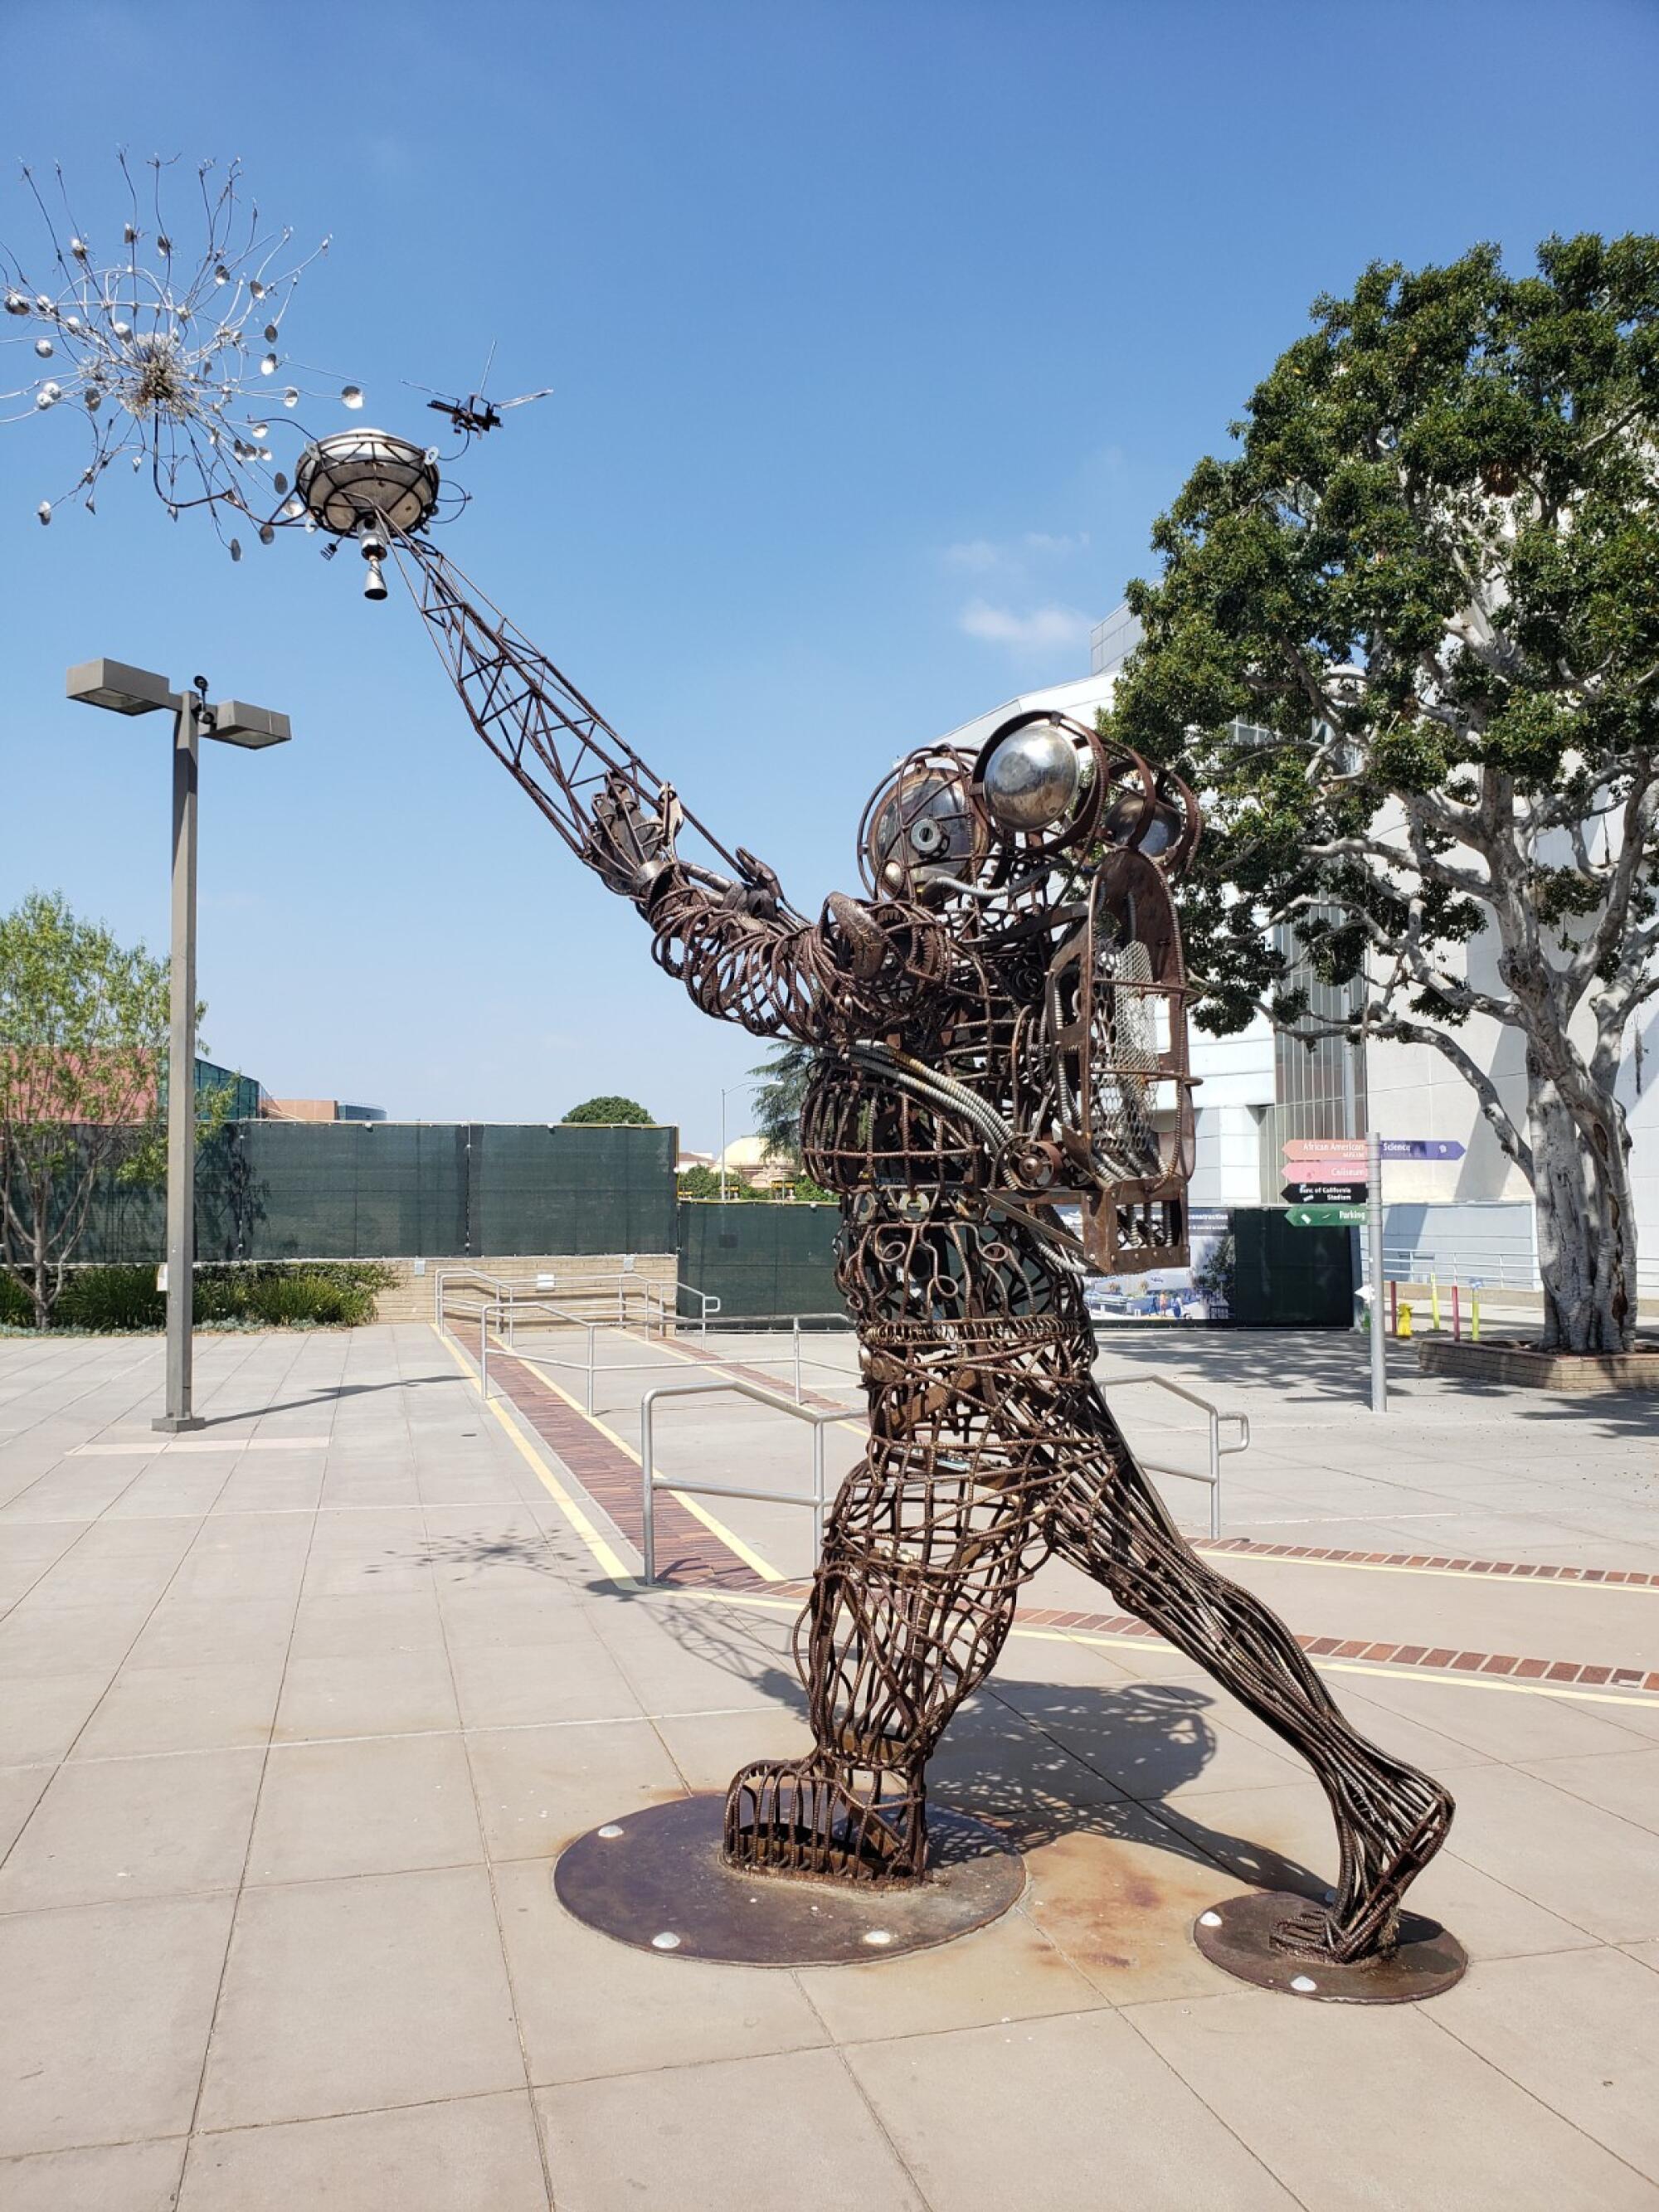 Charles Dickson's sculpture "Wishing on a Star" stands outside the California African American Museum in Los Angeles.